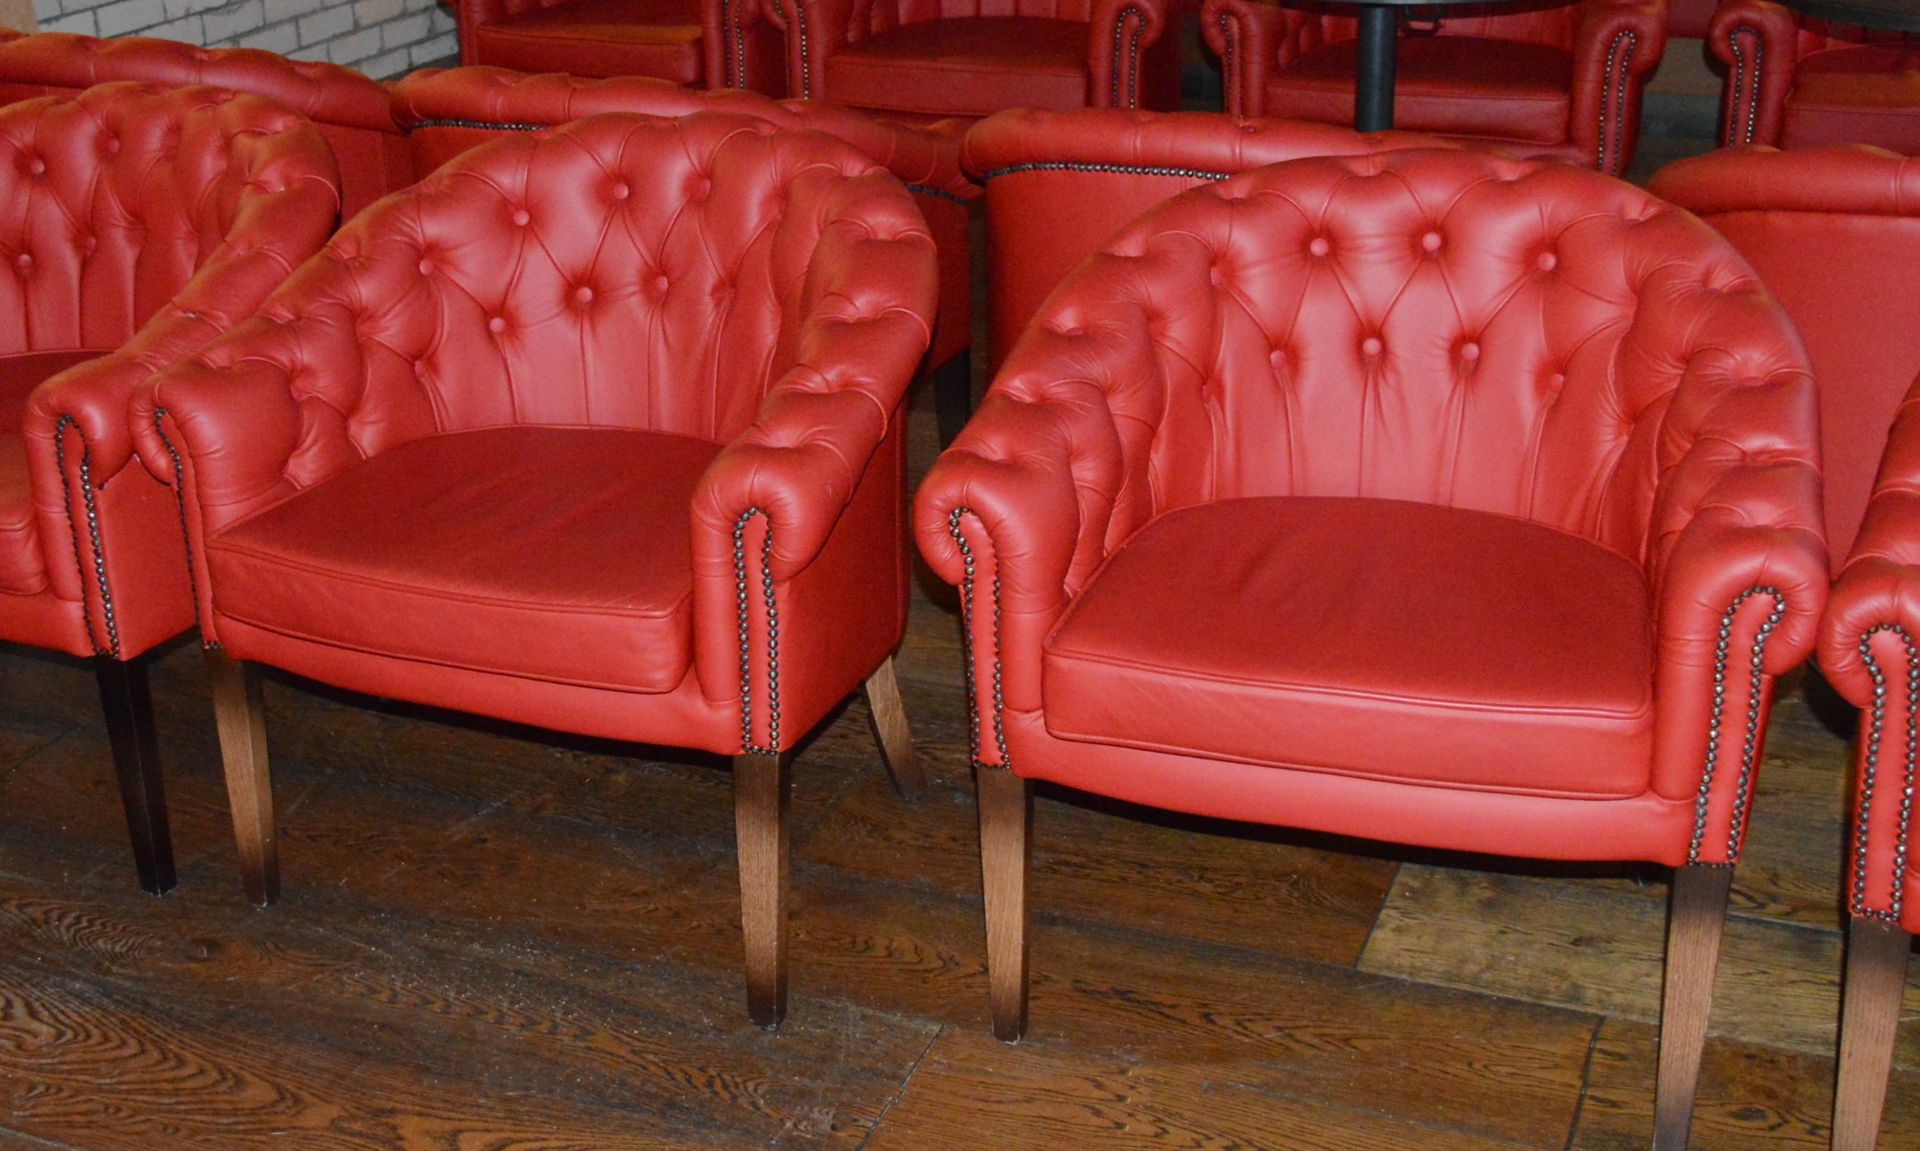 1 x Chesterfield Style Buttoned Back Red Leather Tub Chair With Hardwood Legs Finished in an - Image 8 of 8